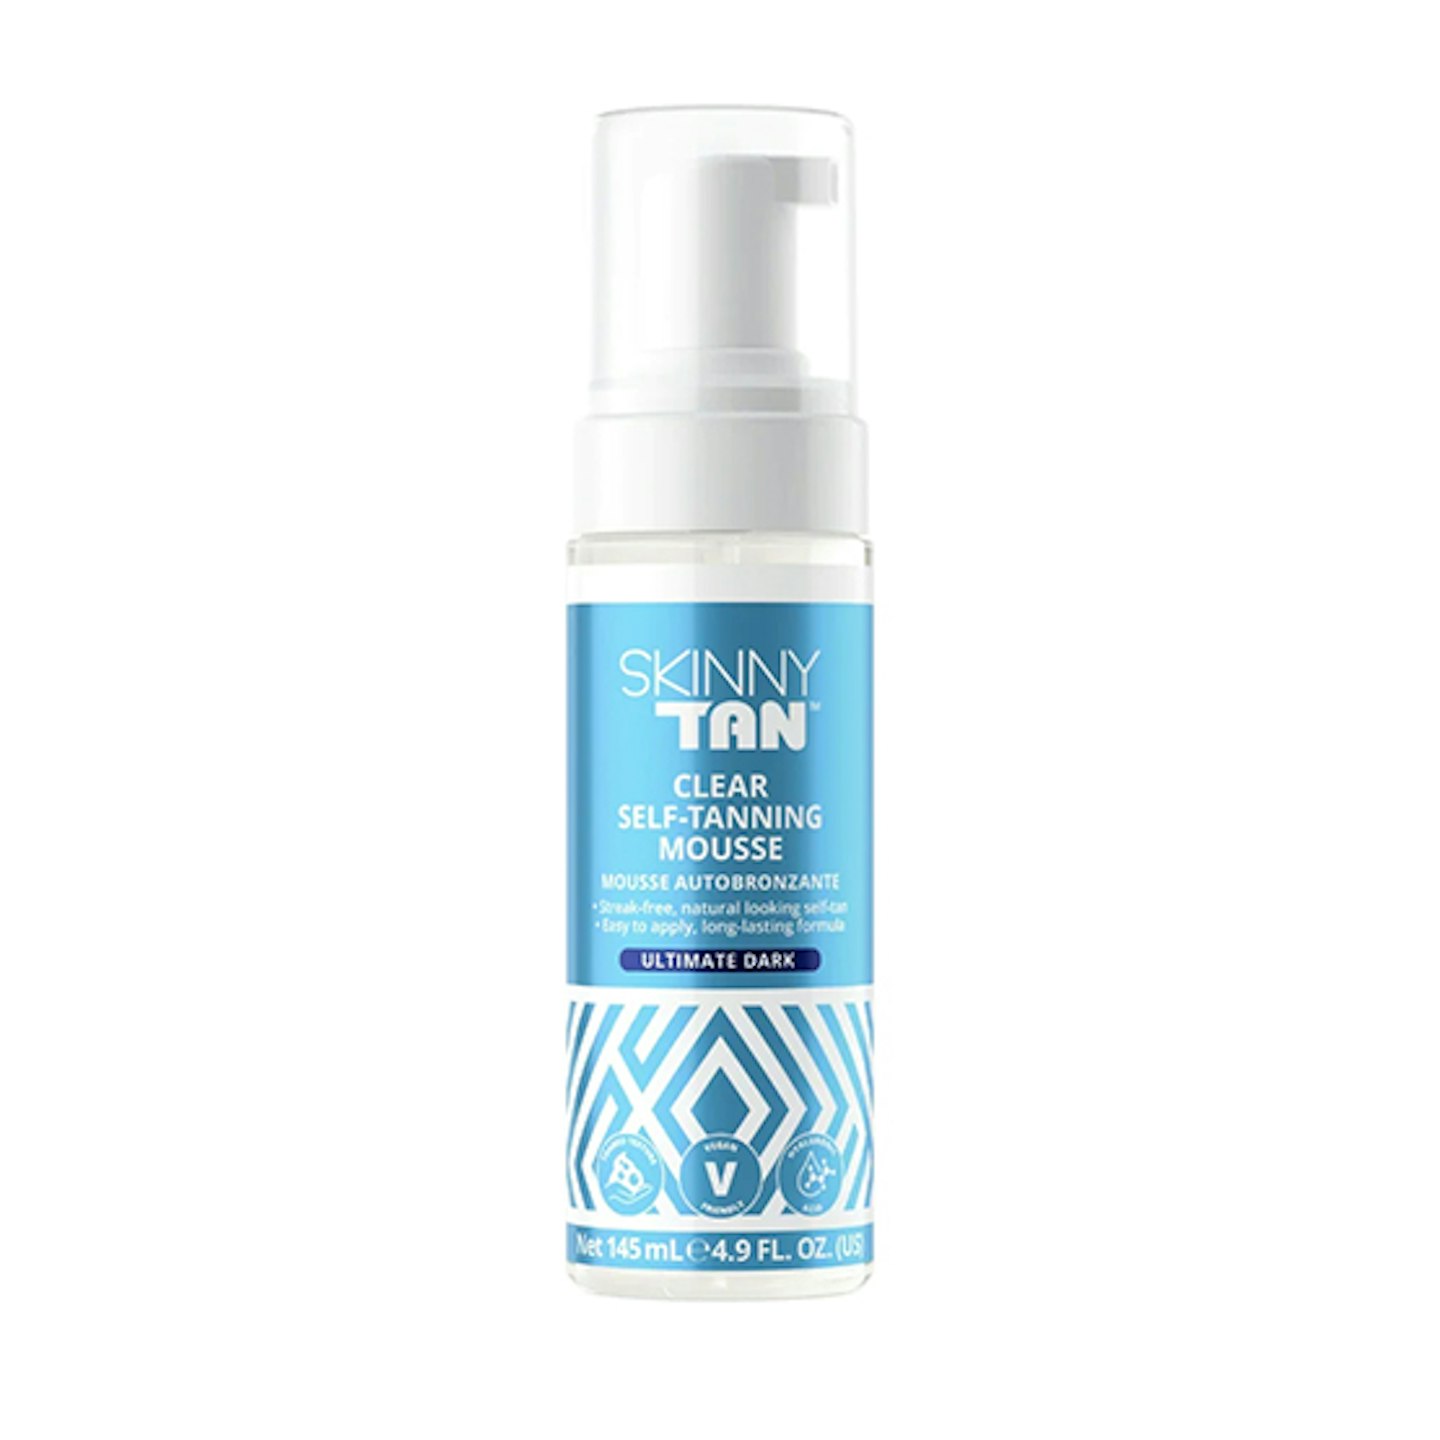 Skinny tan clear mousse